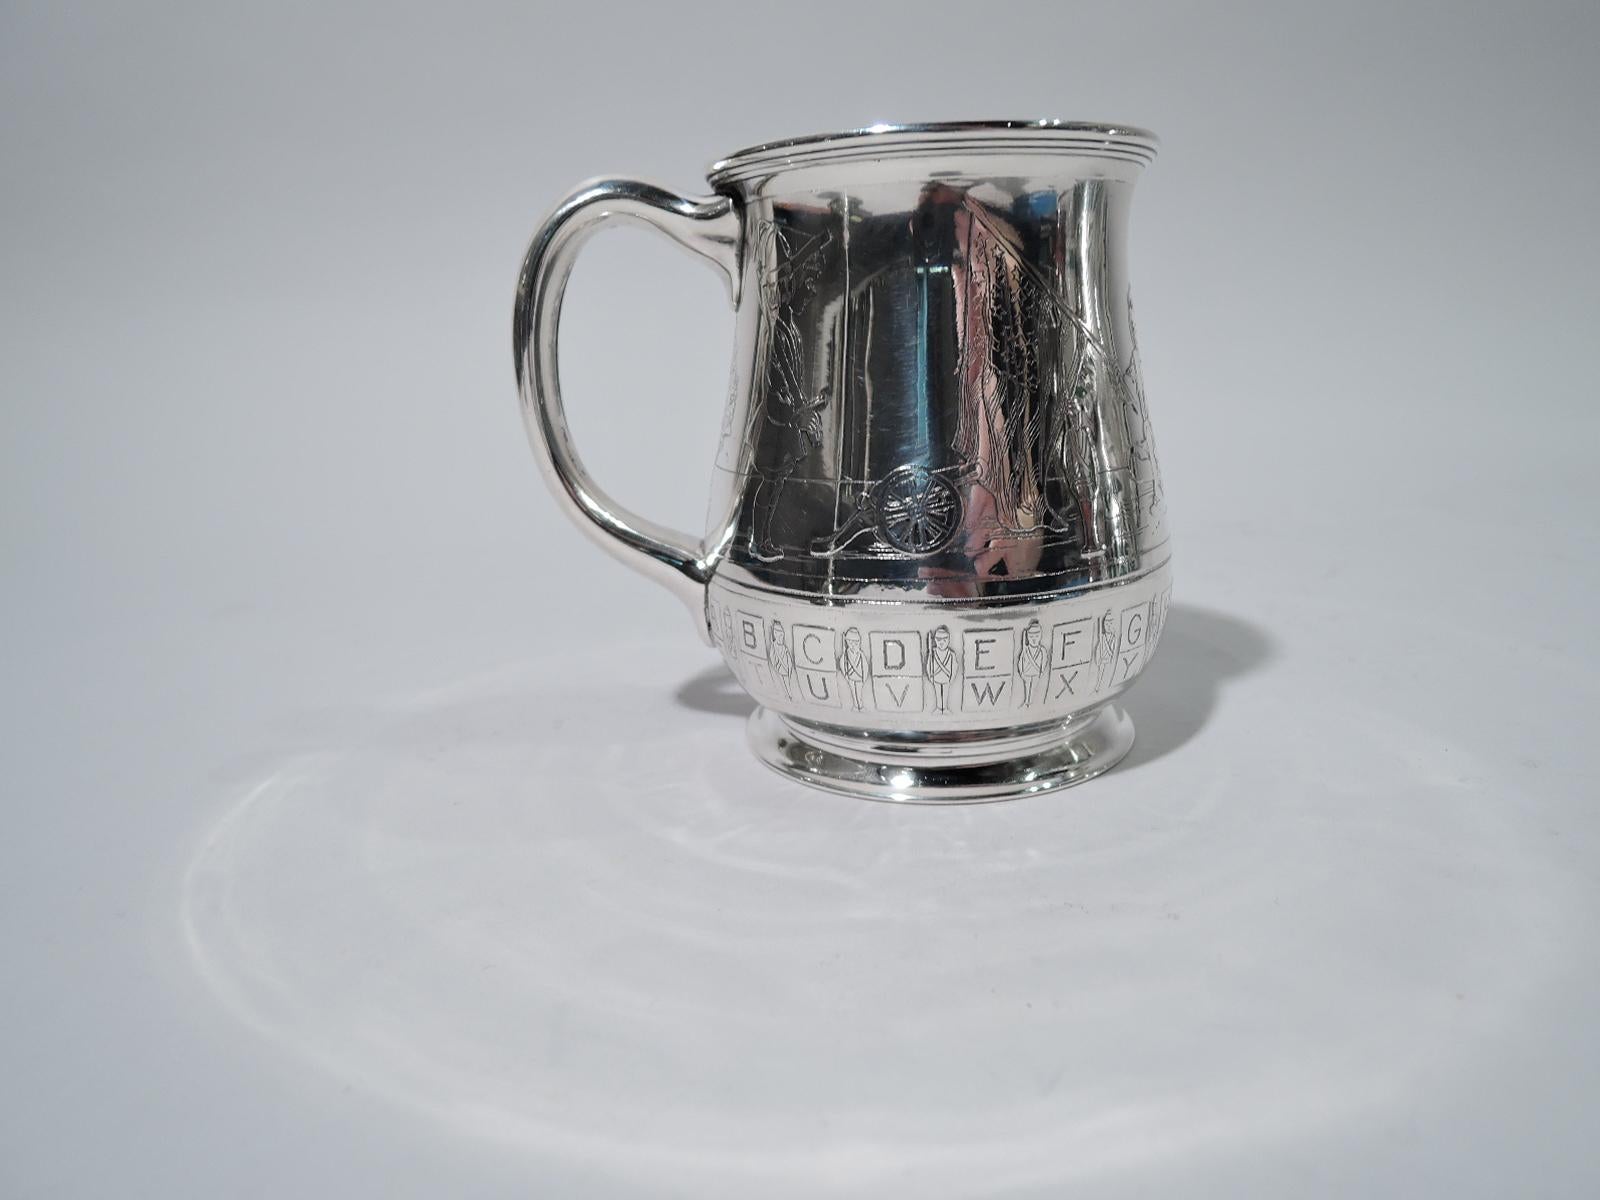 Edwardian sterling silver baby cup. Made by Tiffany & Co. in New York, circa 1910. Curved body with flared rim, C-scroll handle, and raised foot. Acid-etched scene depicting a patriotic assembly, with one child holding a sword, another waving a